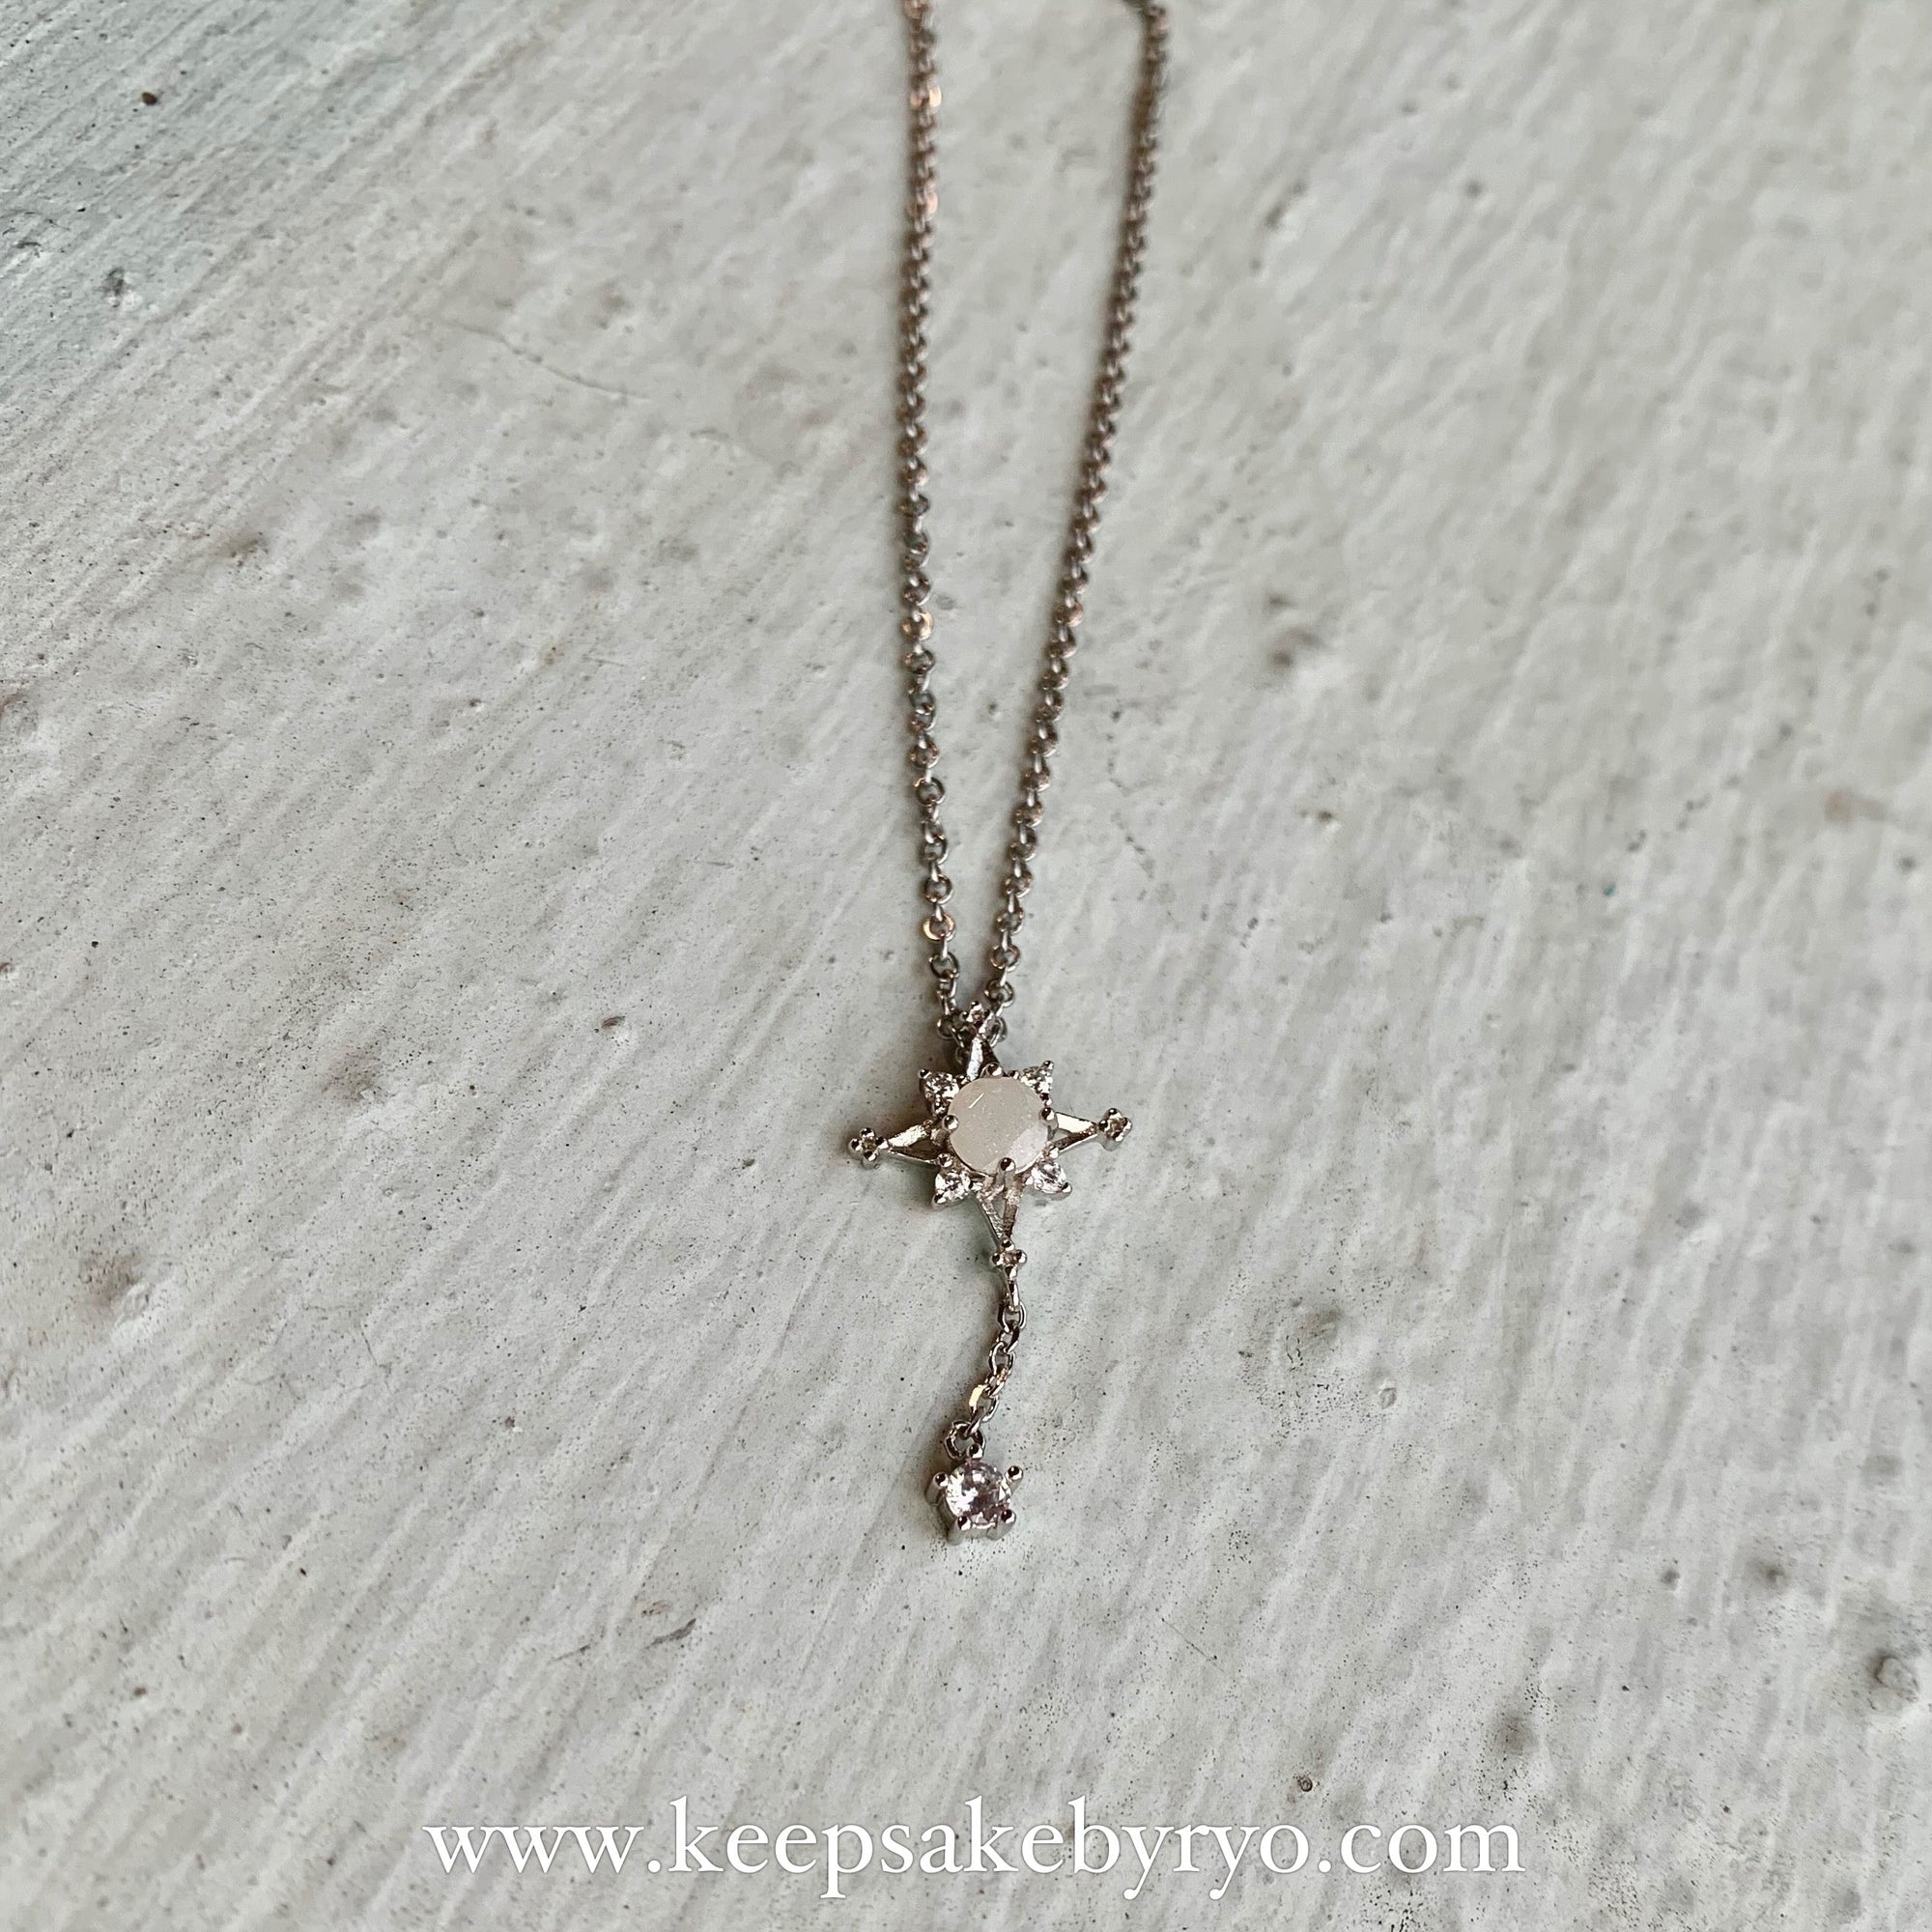 SOLITAIRE: SNOWDROP NECKLACE WITH ROUND INCLUSION STONE